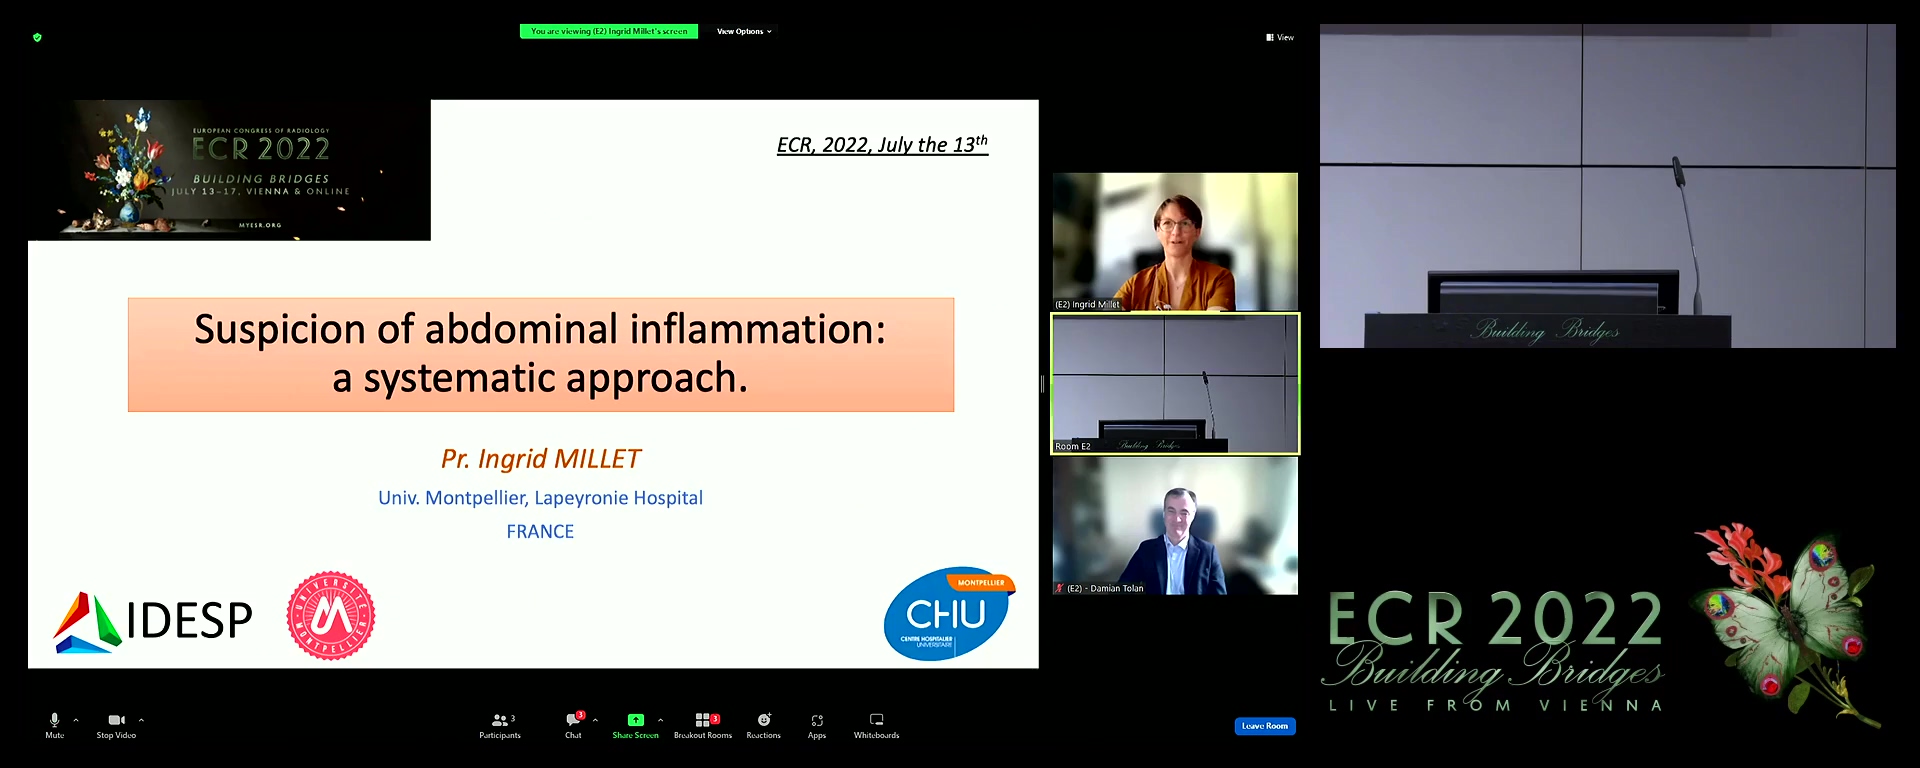 Suspicion of abdominal inflammation: a systematic approach - Ingrid Millet, Montpellier / FR